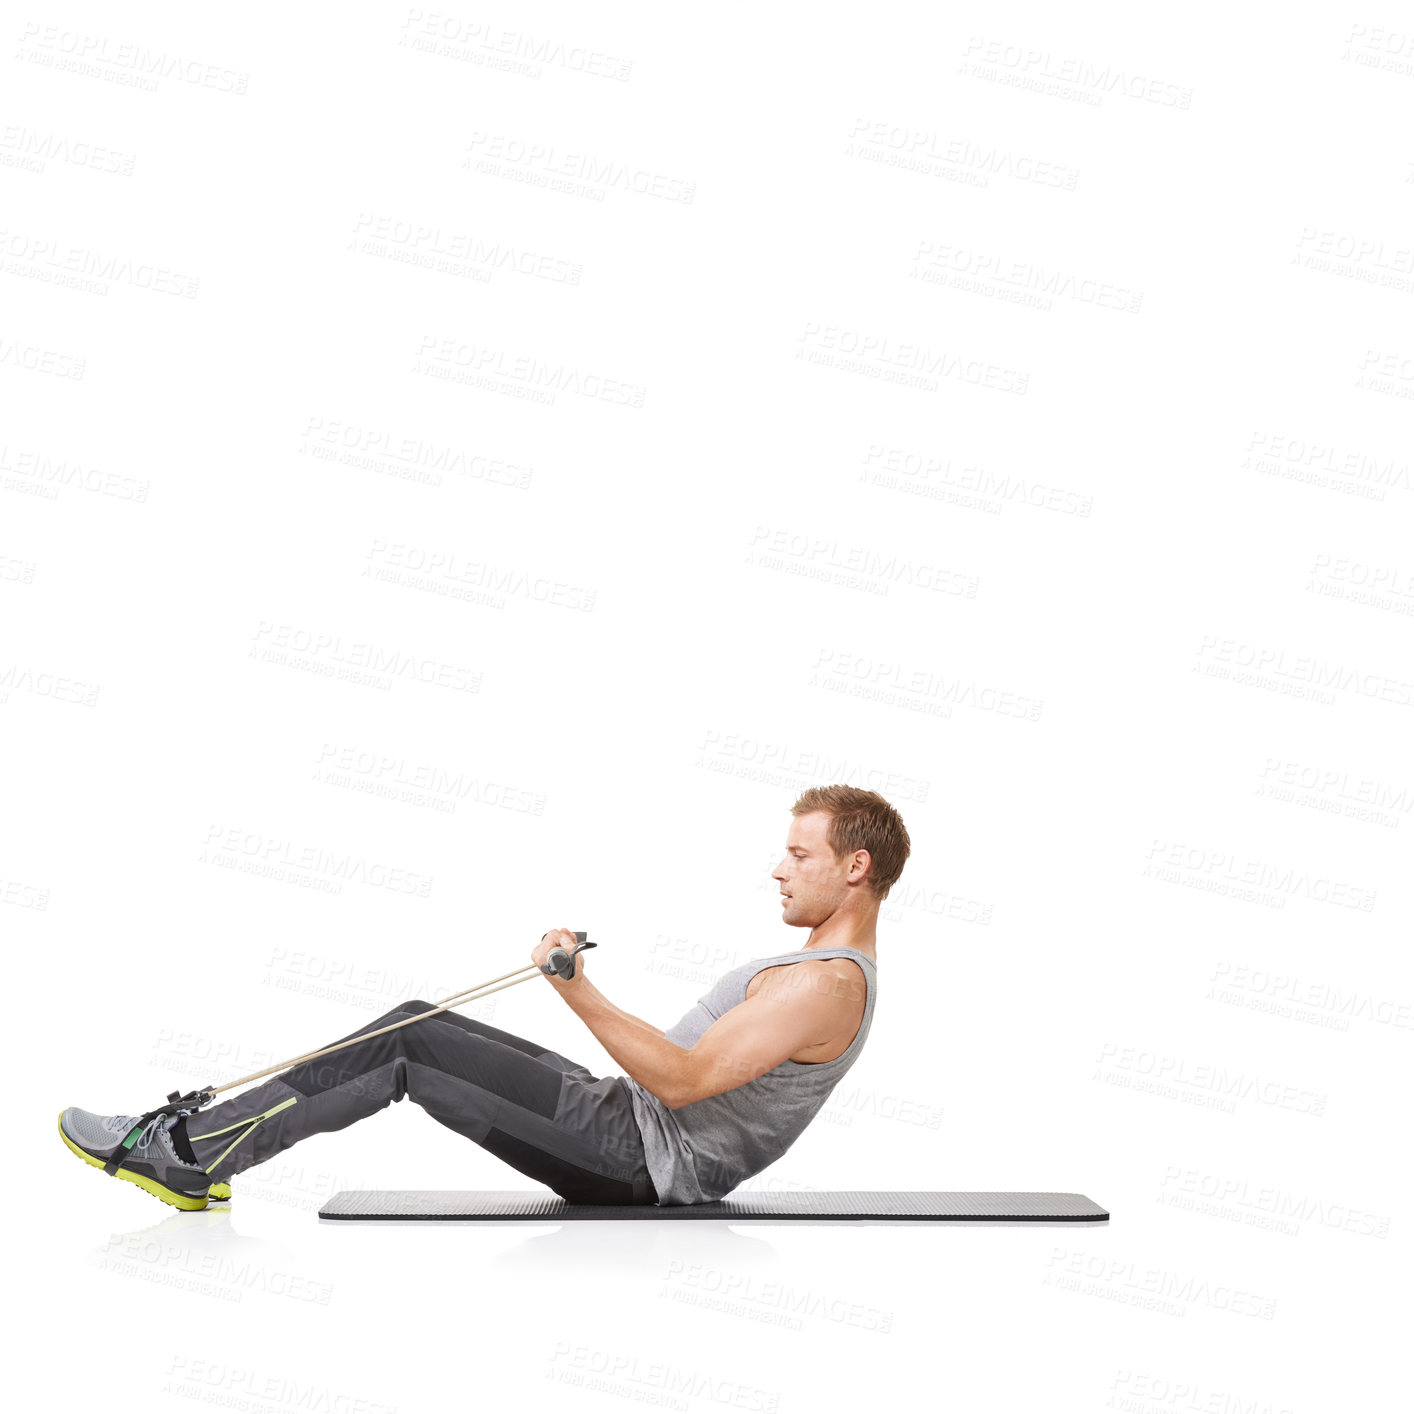 Buy stock photo A young man doing some resistance training